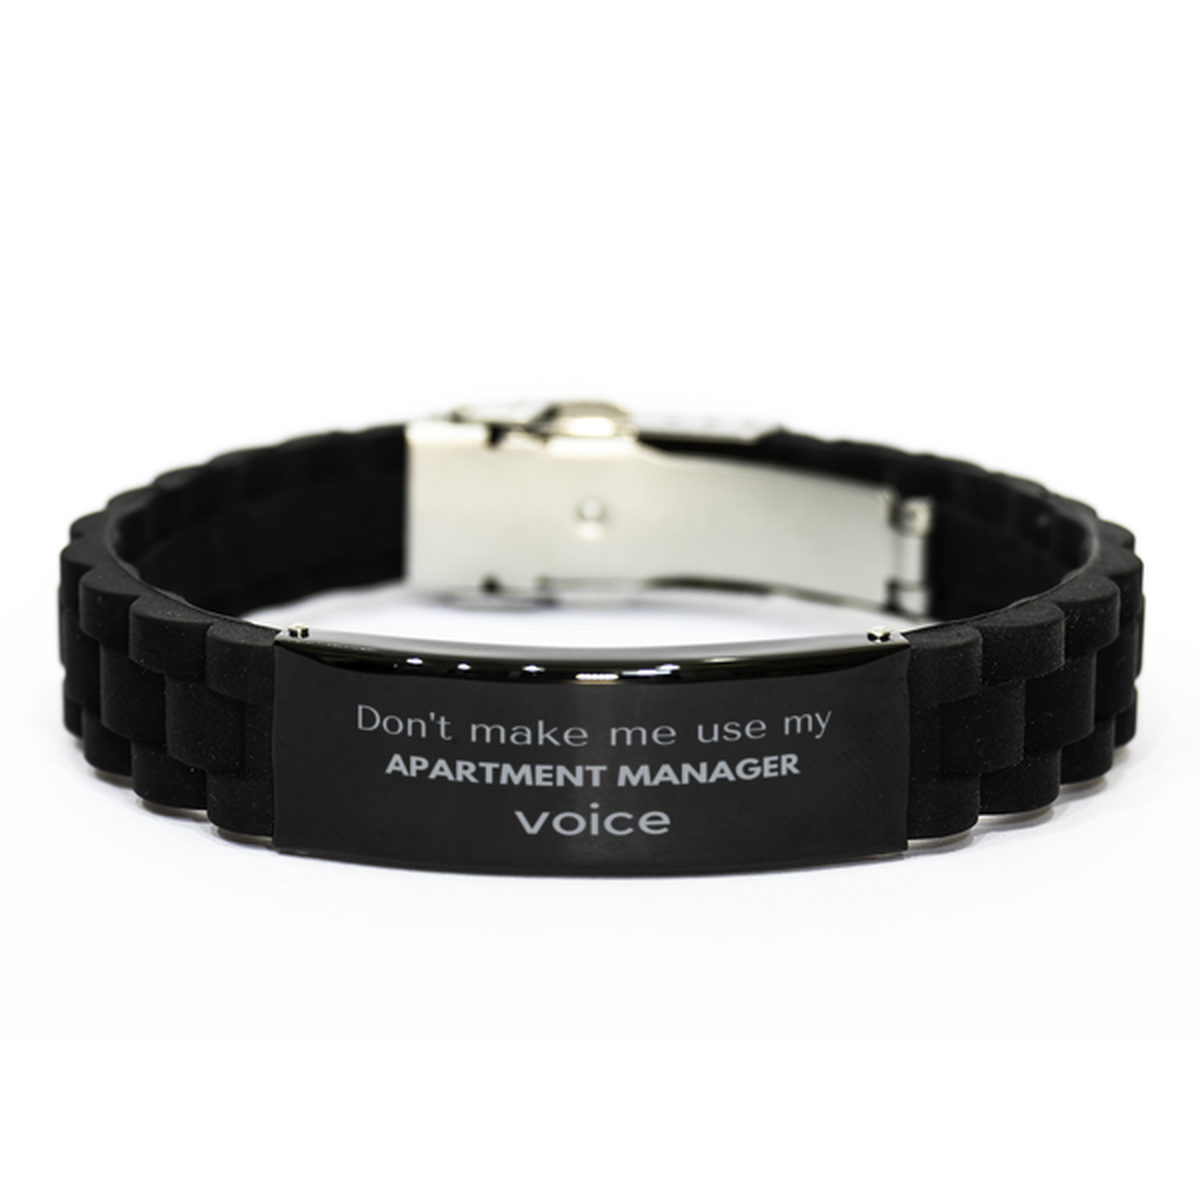 Don't make me use my Apartment Manager voice, Sarcasm Apartment Manager Gifts, Christmas Apartment Manager Black Glidelock Clasp Bracelet Birthday Unique Gifts For Apartment Manager Coworkers, Men, Women, Colleague, Friends